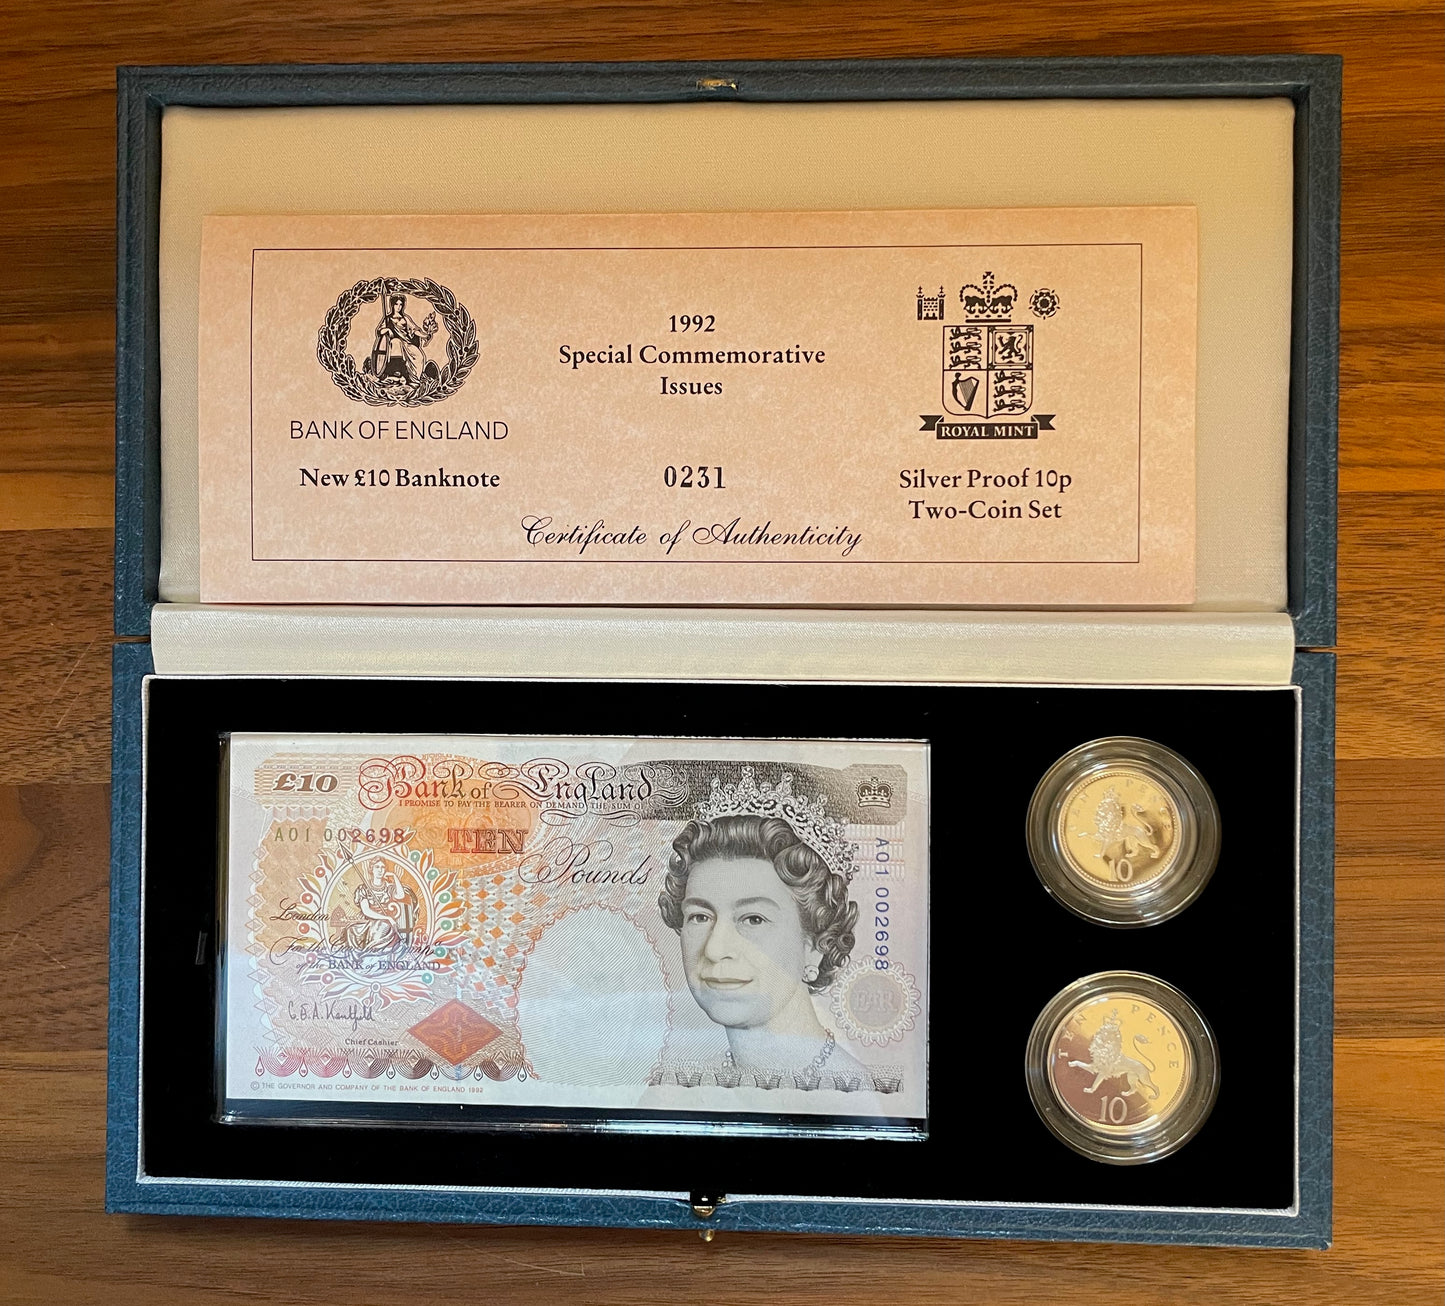 C105 1992 Debden presentation set new first run £10 B366 (A01) and new and old silver proof 10p coins